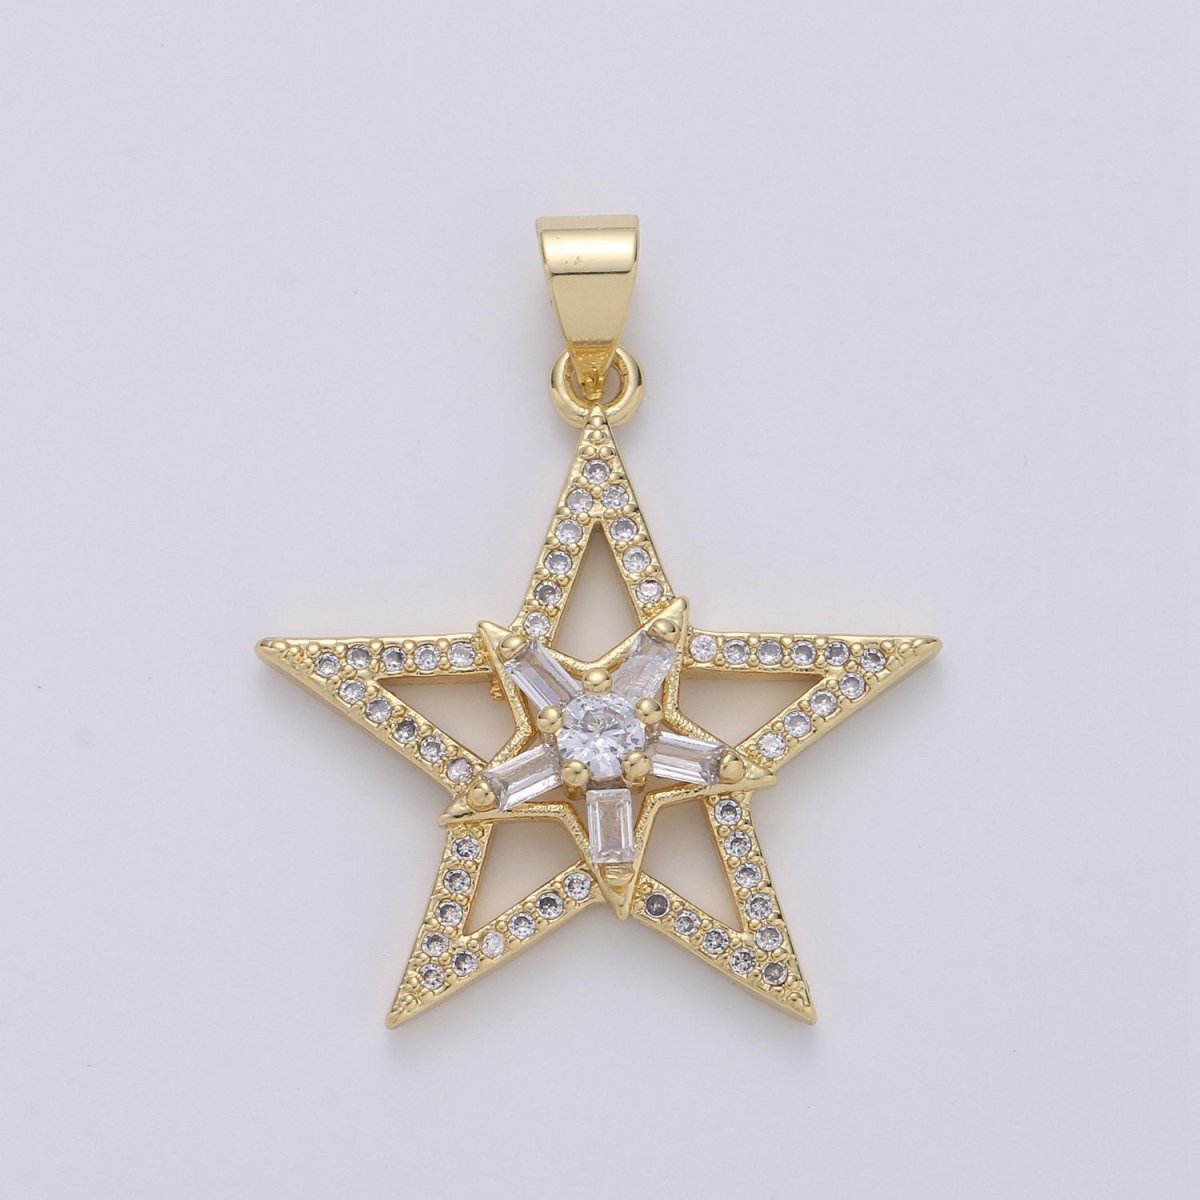 Gold Star Pendant With Baguette Stone, Five Star Charms, Women Necklaces, Star Jewelry, Celestial Jewelry for DIY Necklace 24K Gold Filled I-877 - DLUXCA